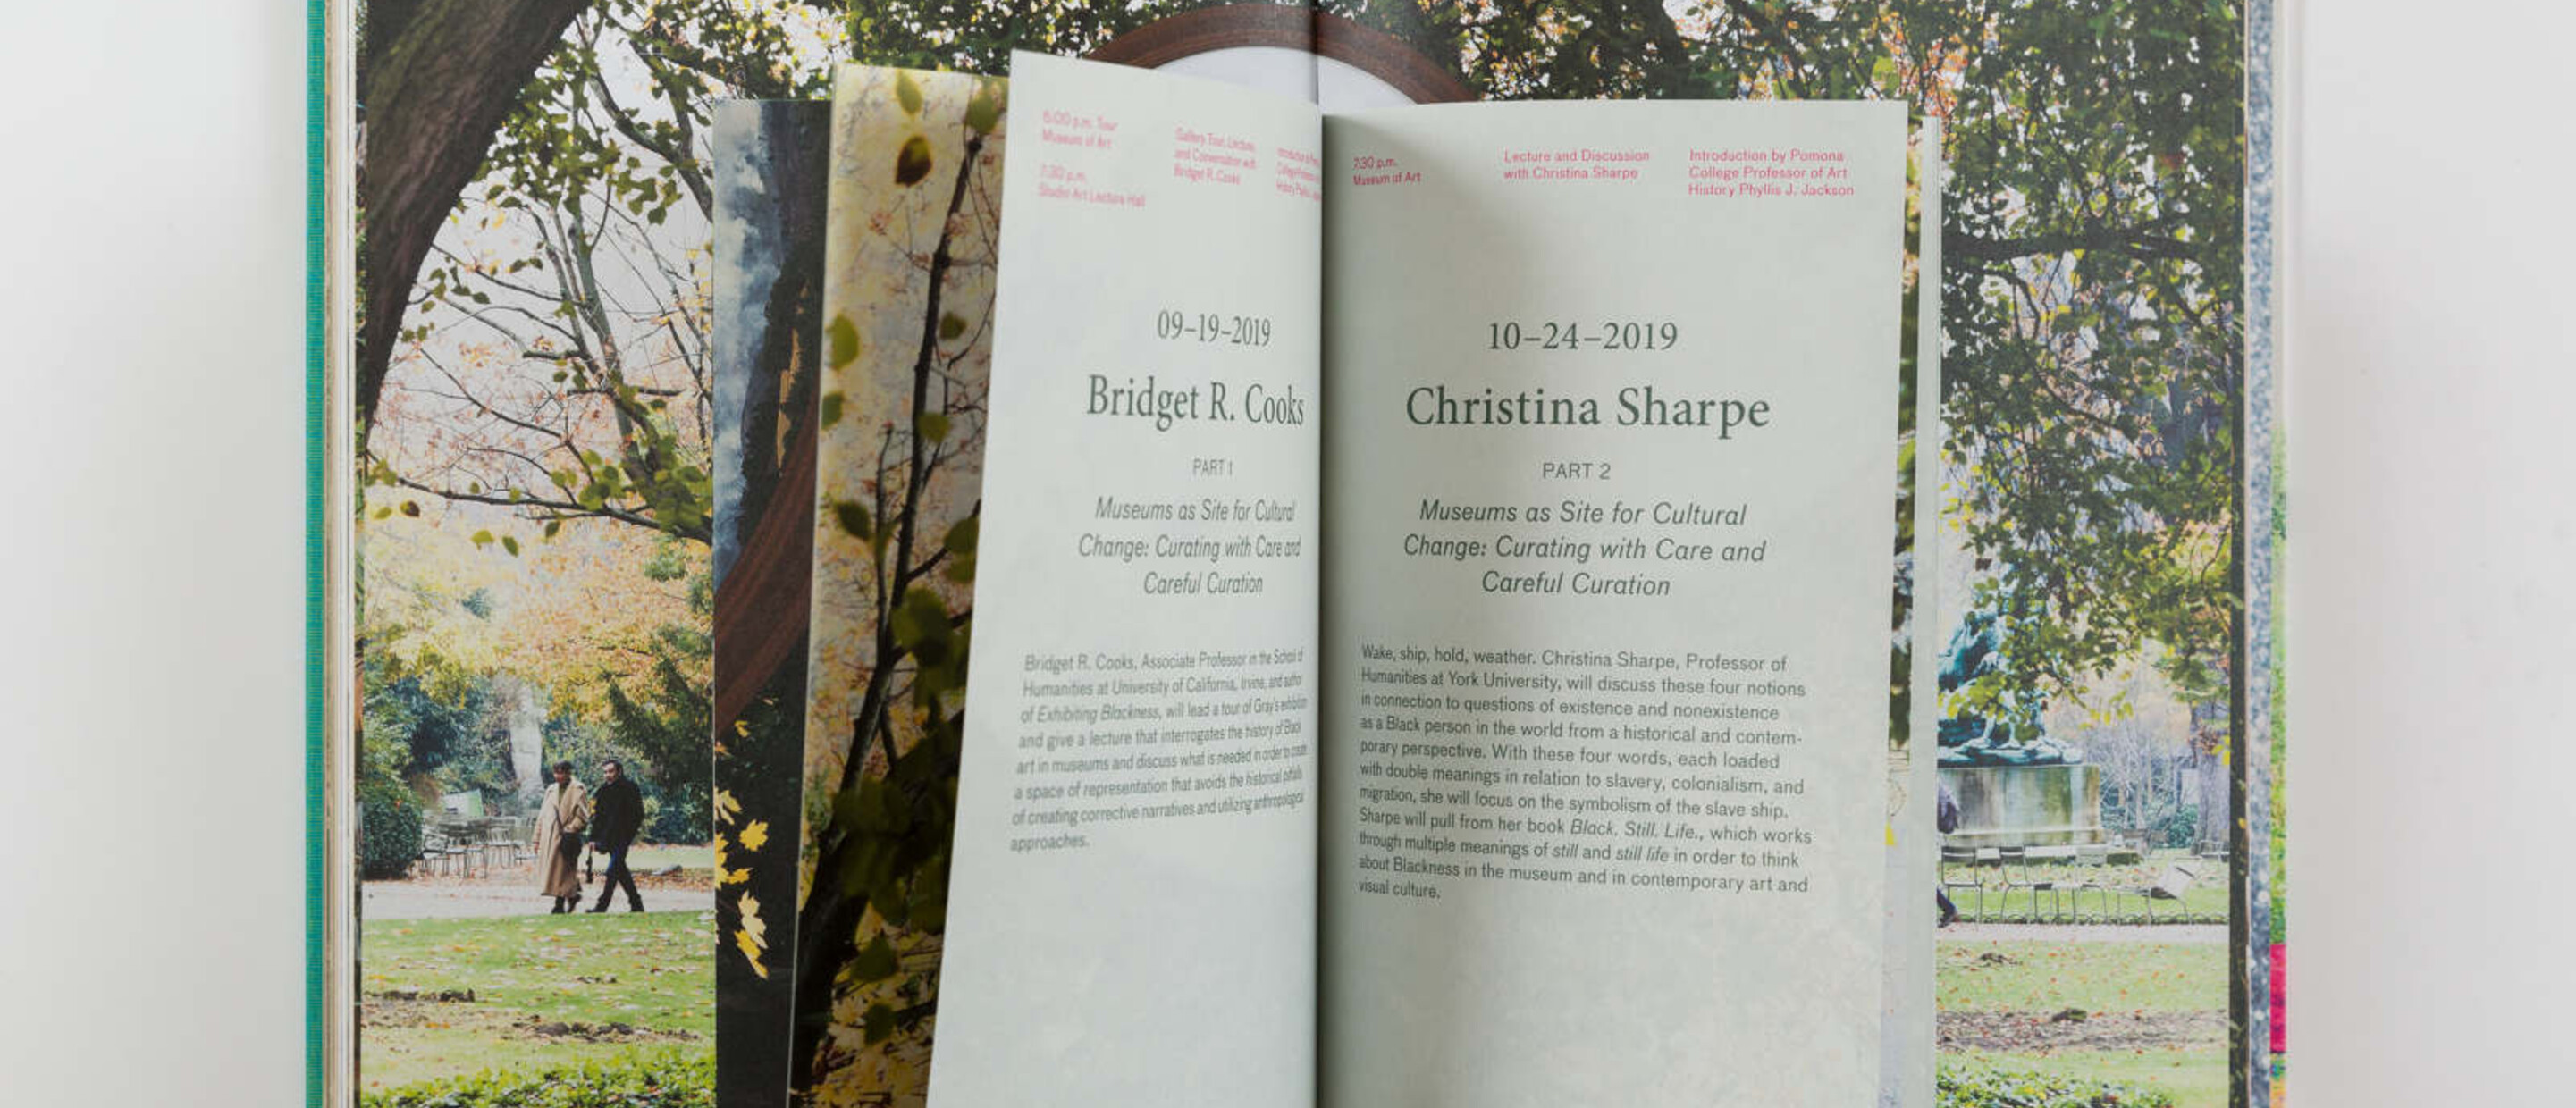 Booklet shown inside a book with pages open as spread